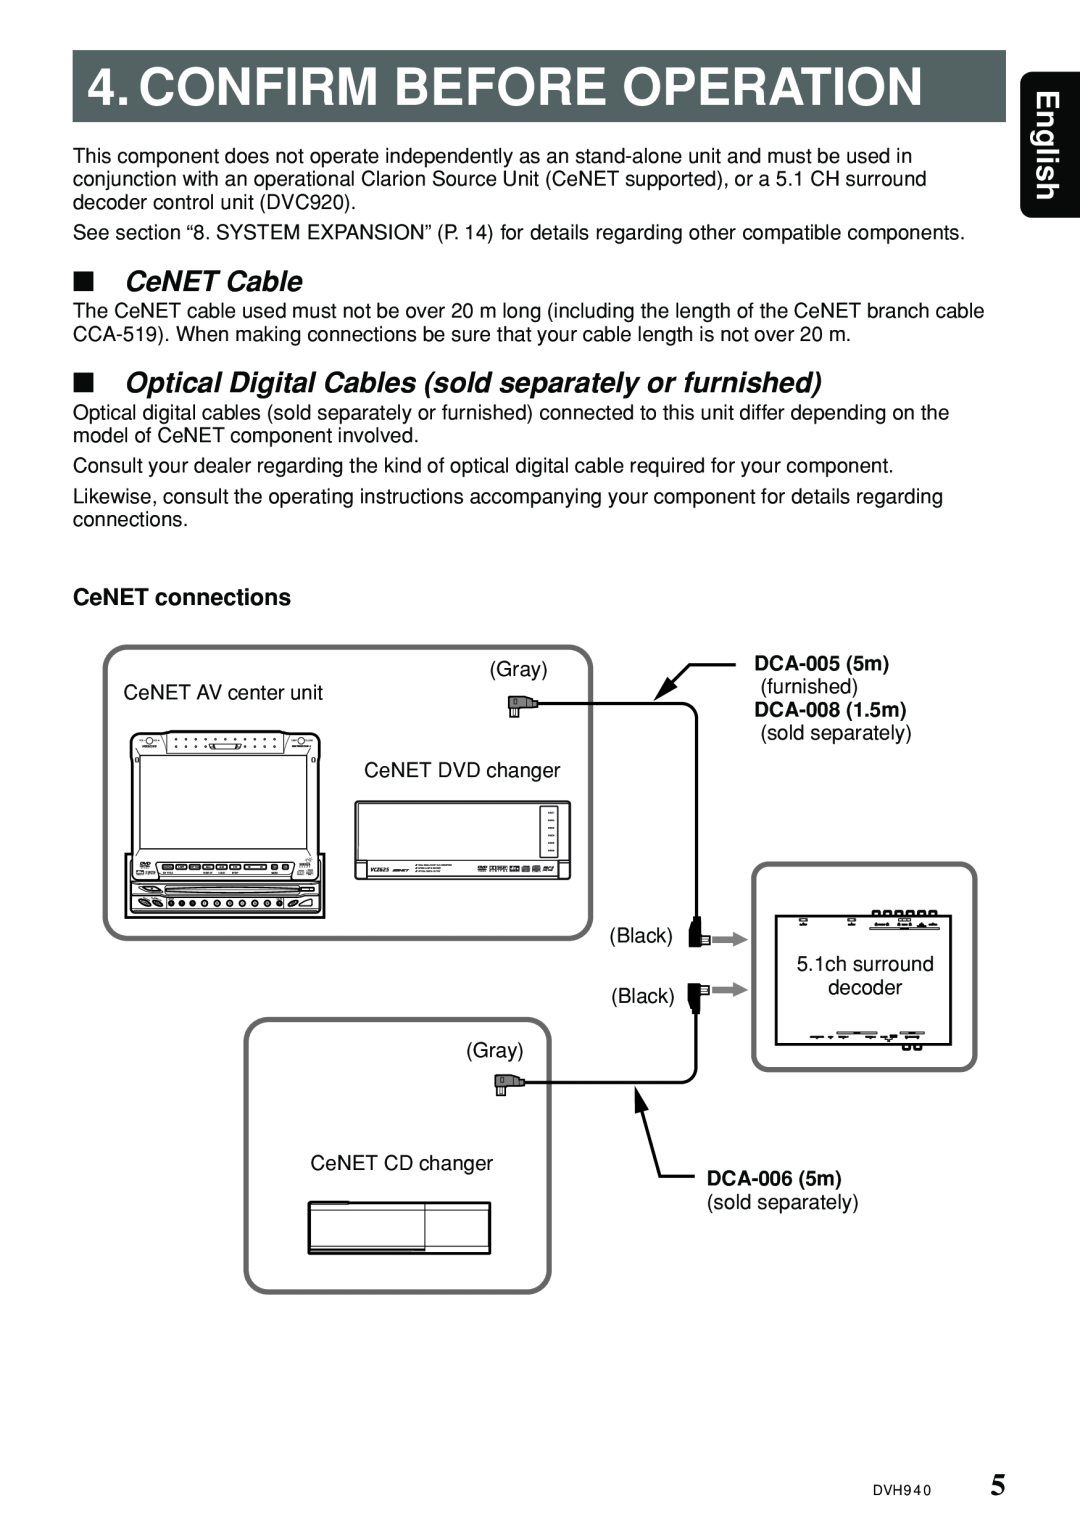 Clarion DVH940N owner manual Confirm Before Operation, English, CeNET Cable, CeNET connections 